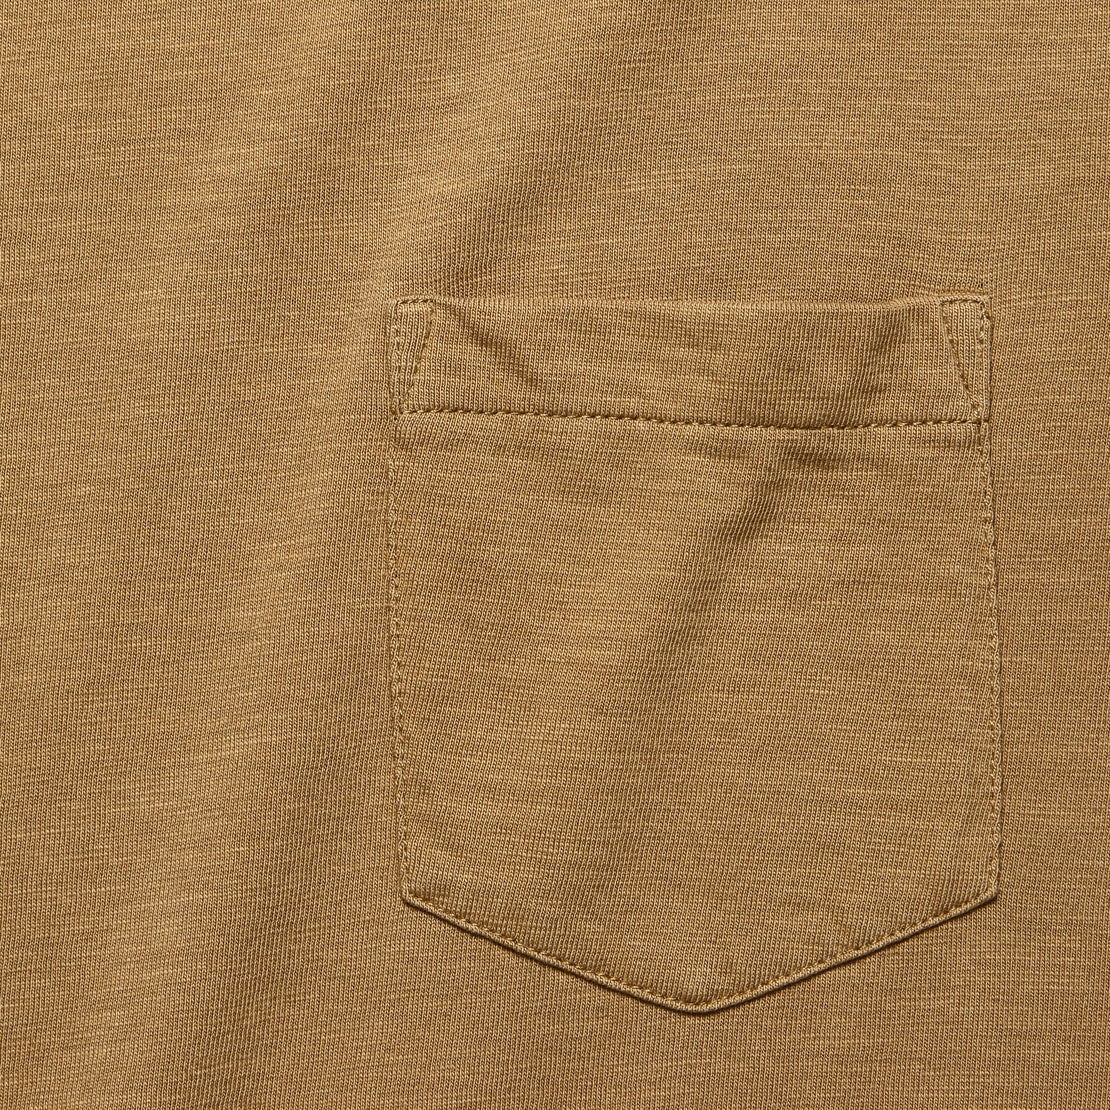 Garment Dyed Pocket Tee - Walnut - Faherty - STAG Provisions - Tops - S/S Tee